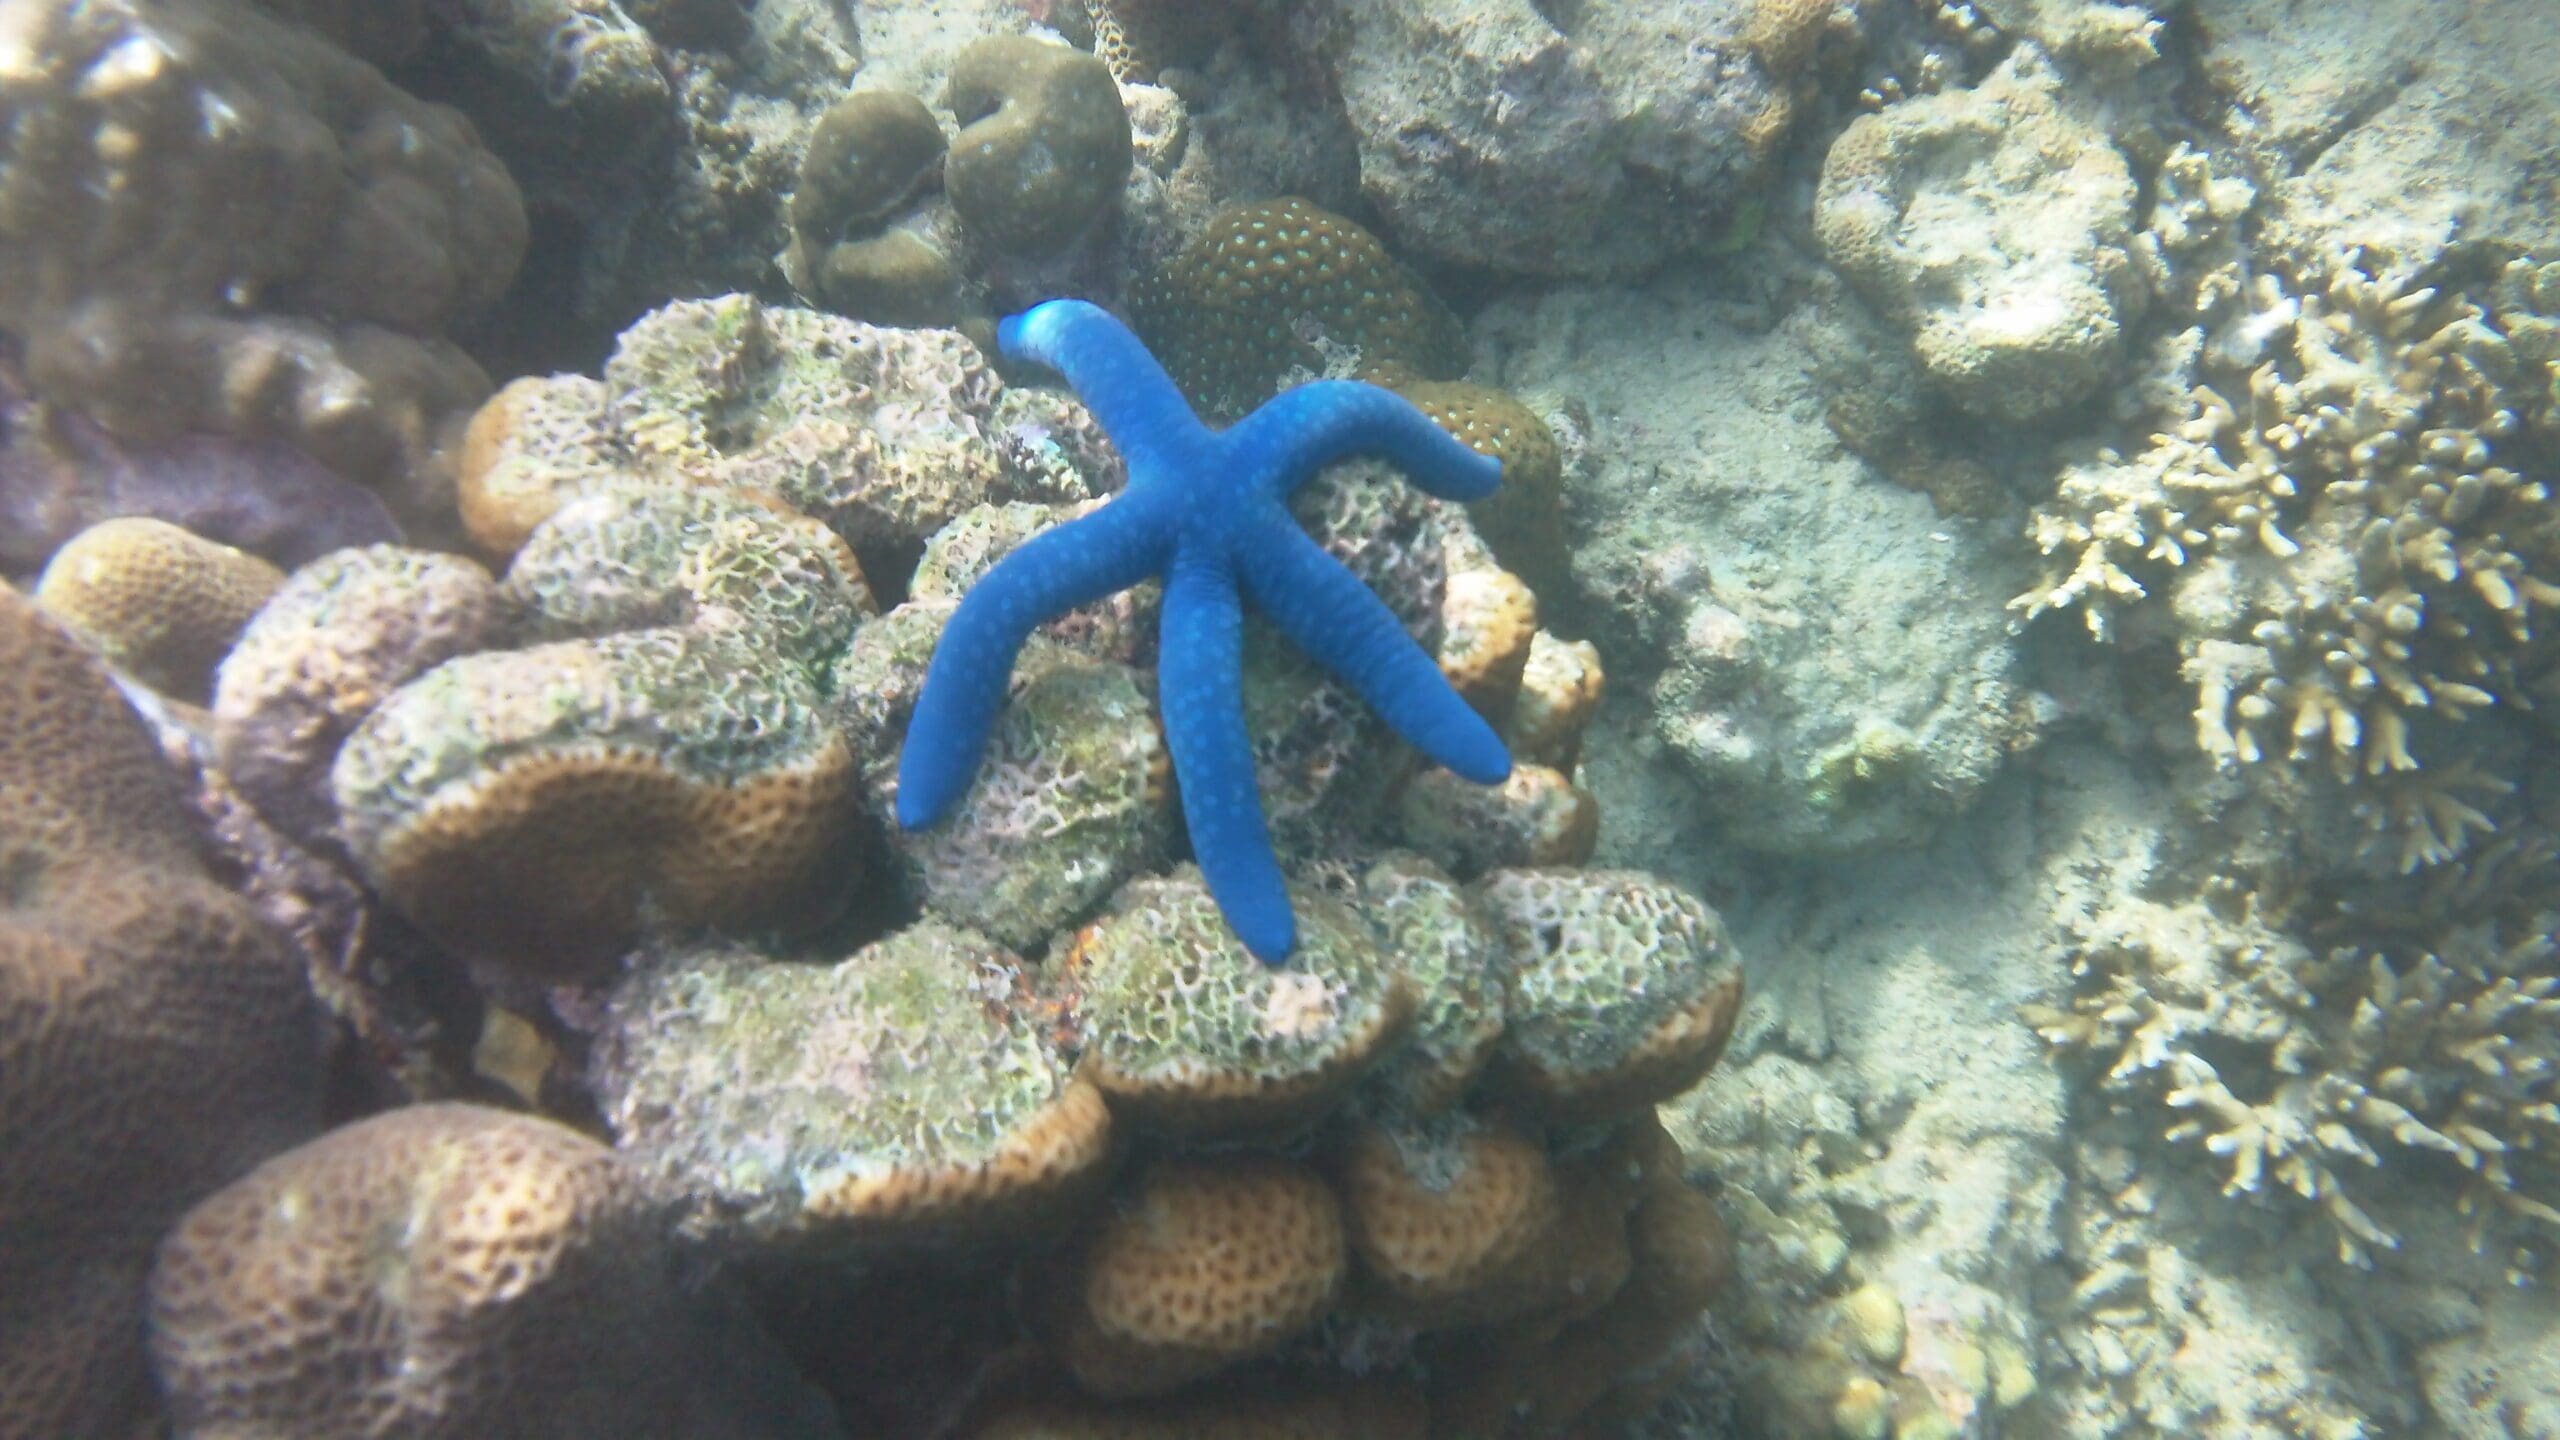 Underwater, a blue starfish lays sprawled out on a Papua New Guinean coral reef.